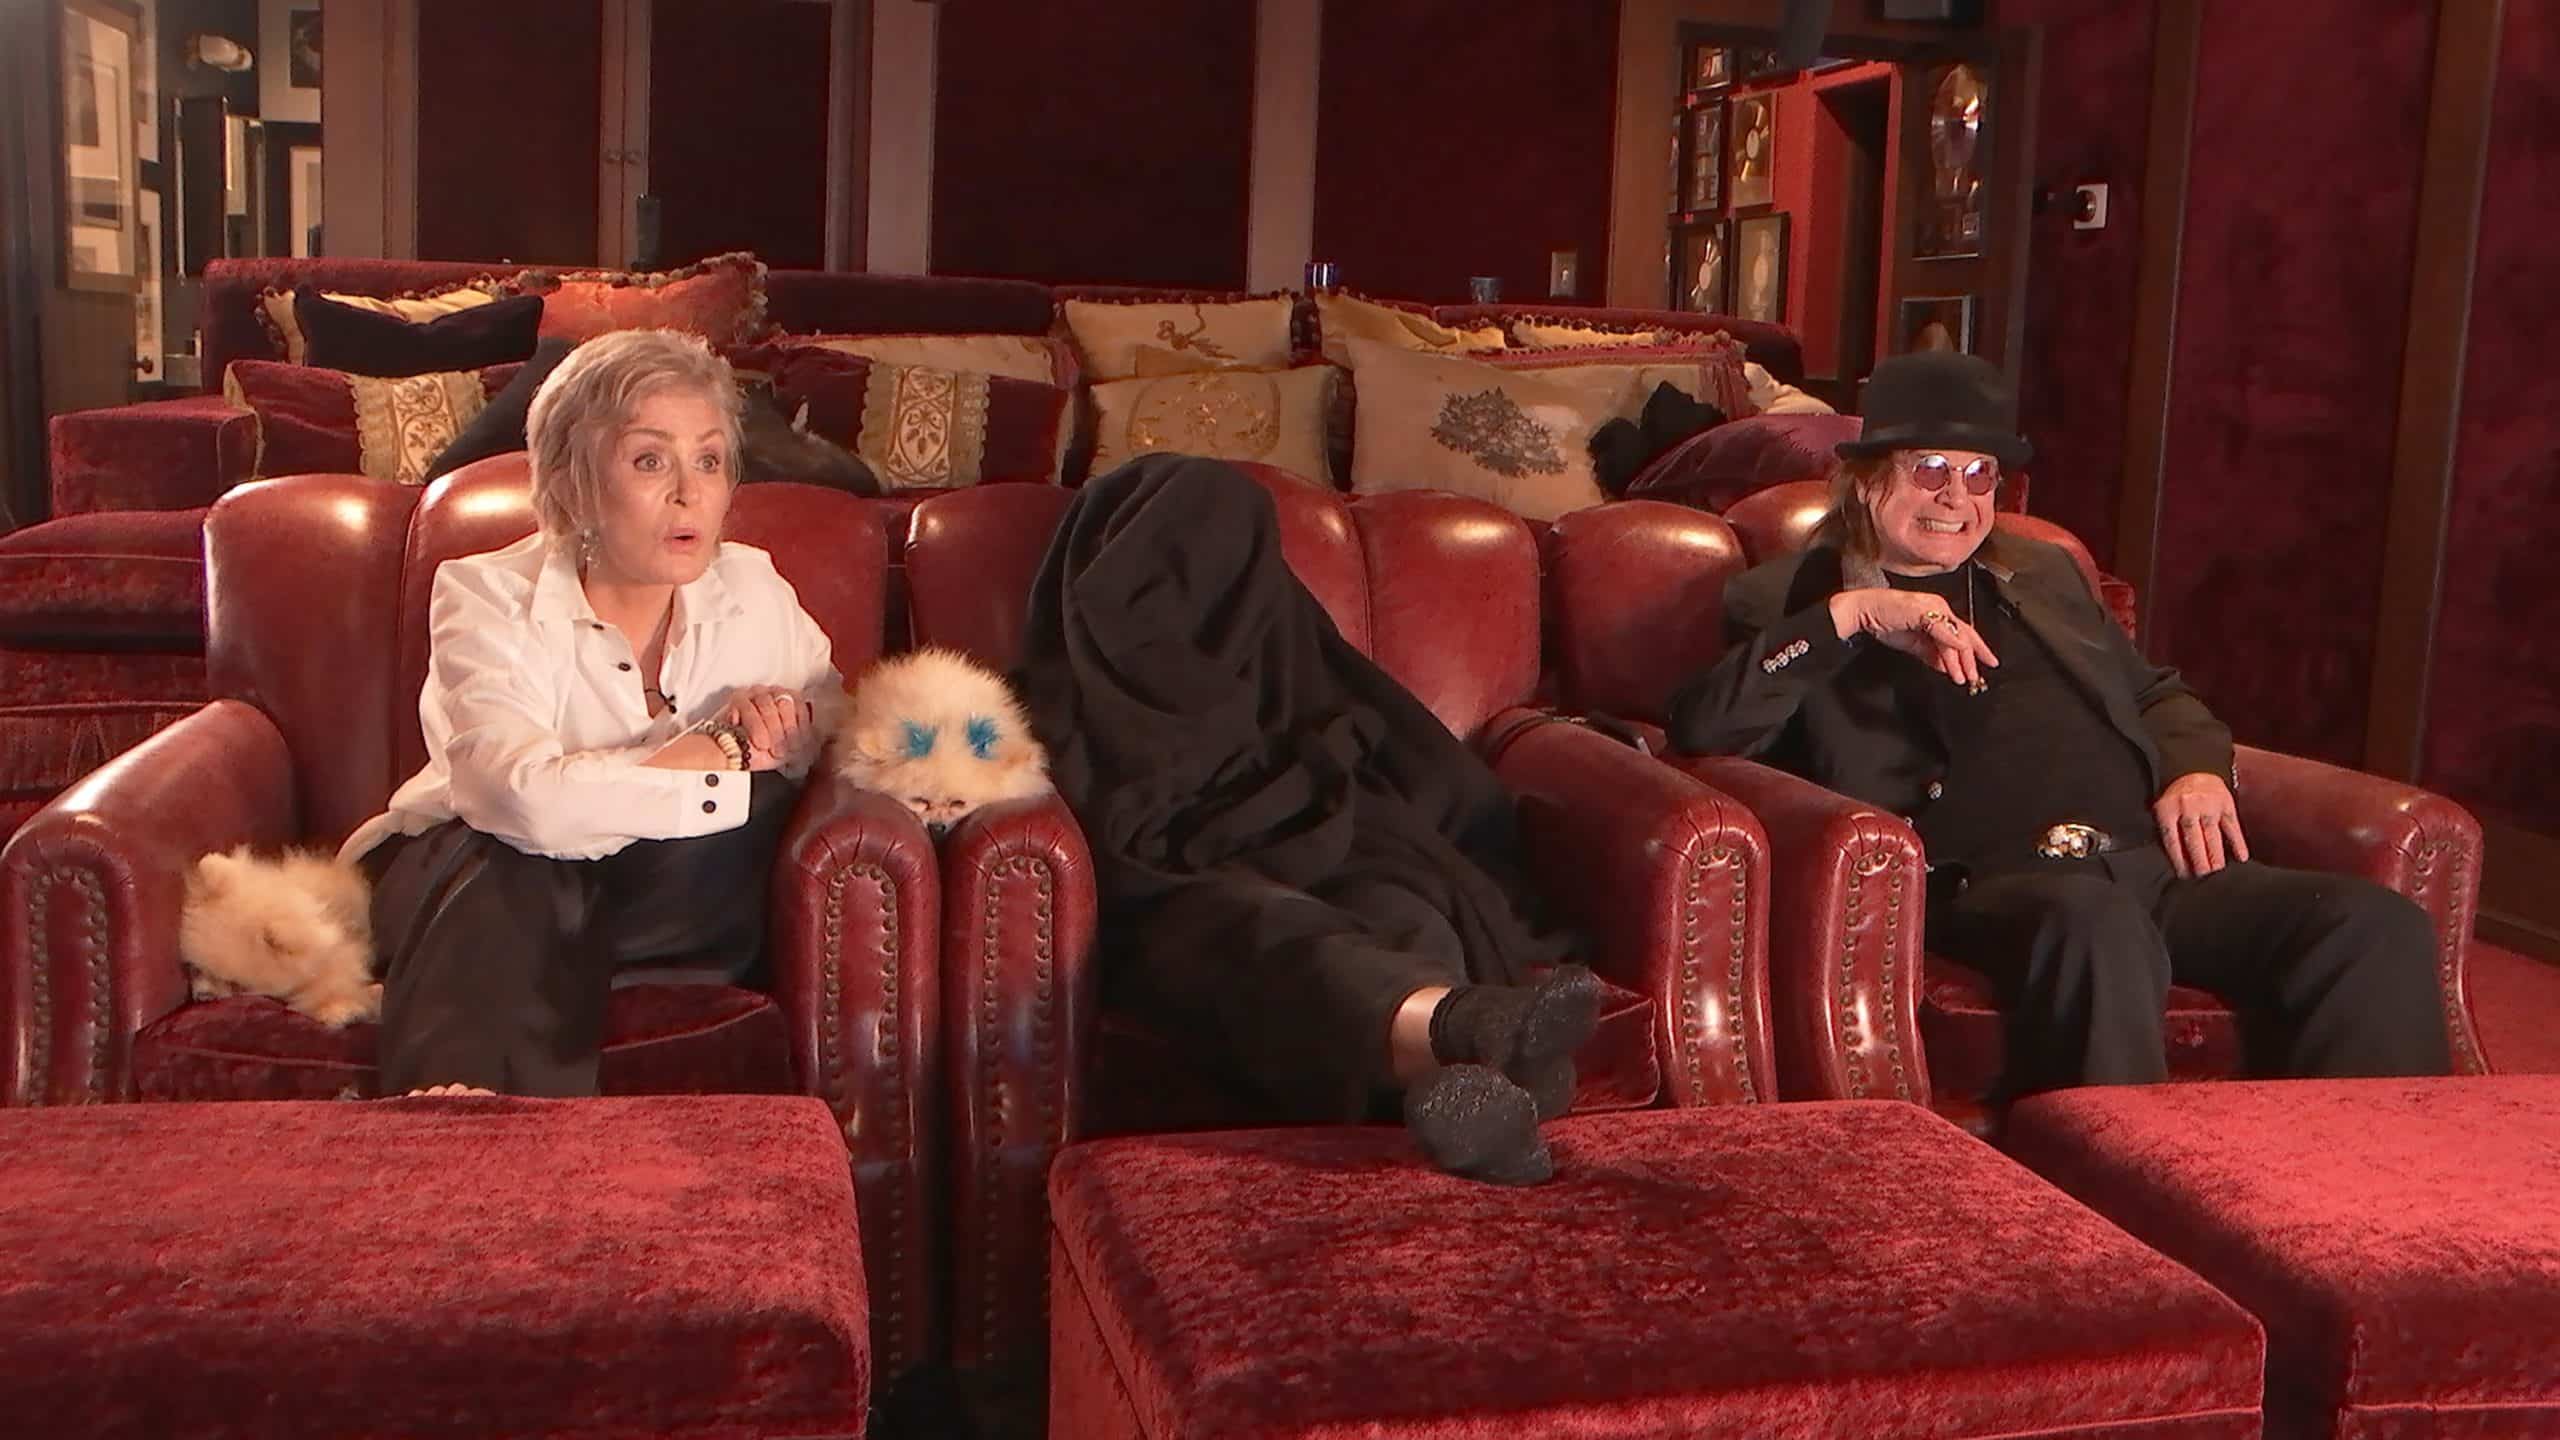 CELEBRITY WATCH PARTY, from left: Sharon, Osbourne, Kelly Osbourne, Ozzy Osbourne, The Celebrity Watch Party Has Begun, (Season 1, ep. 101, aired May 7, 2020)